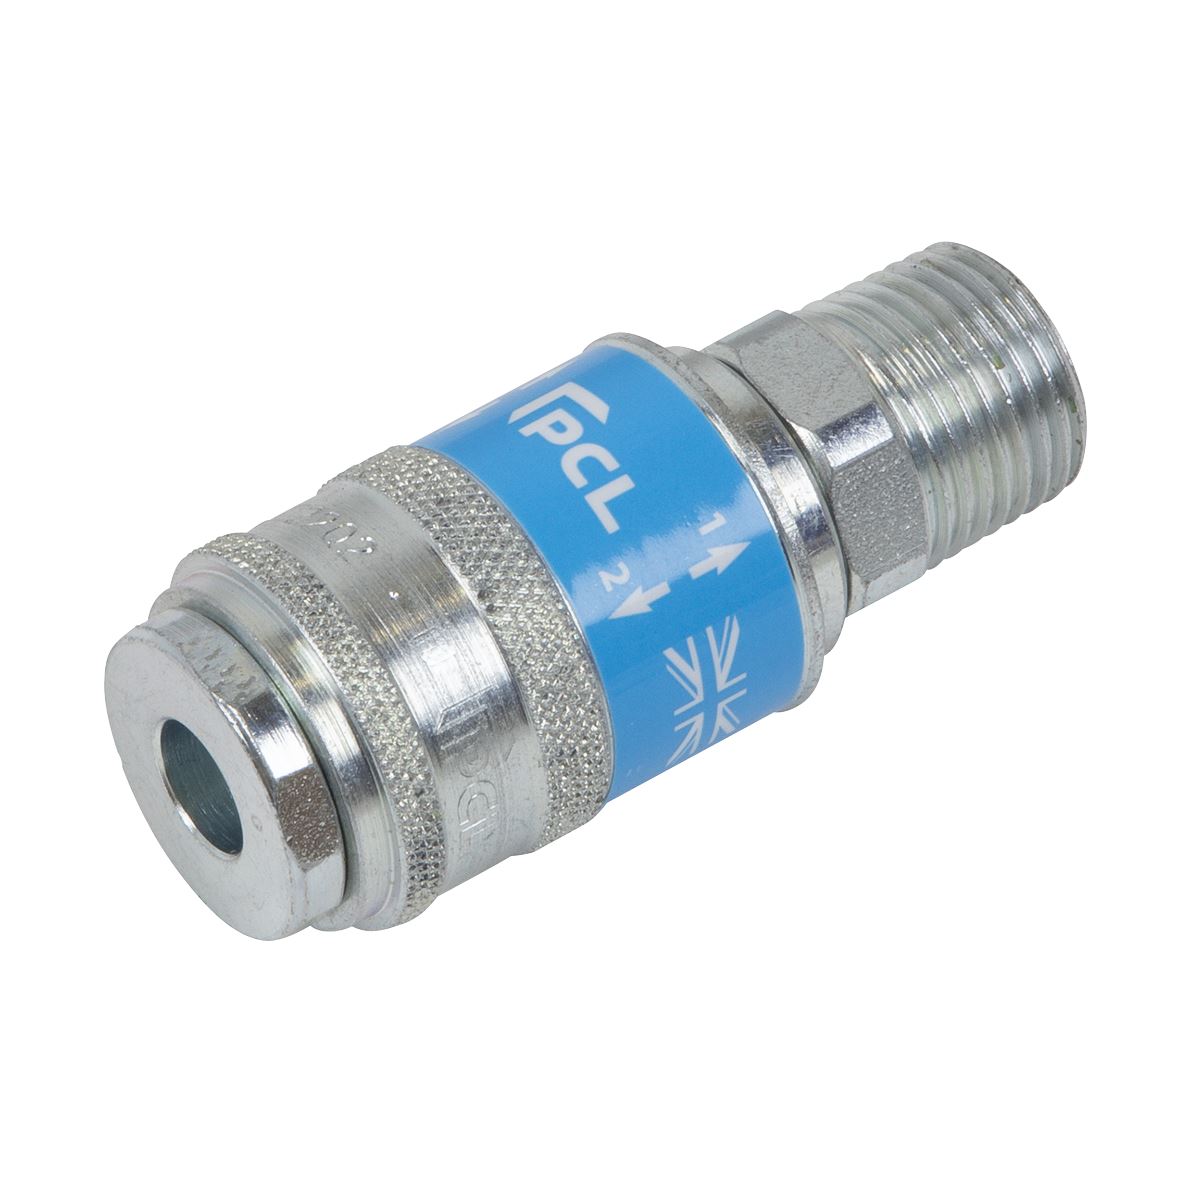 PCL Safeflow Safety Coupling Body Male 1/2"BSP